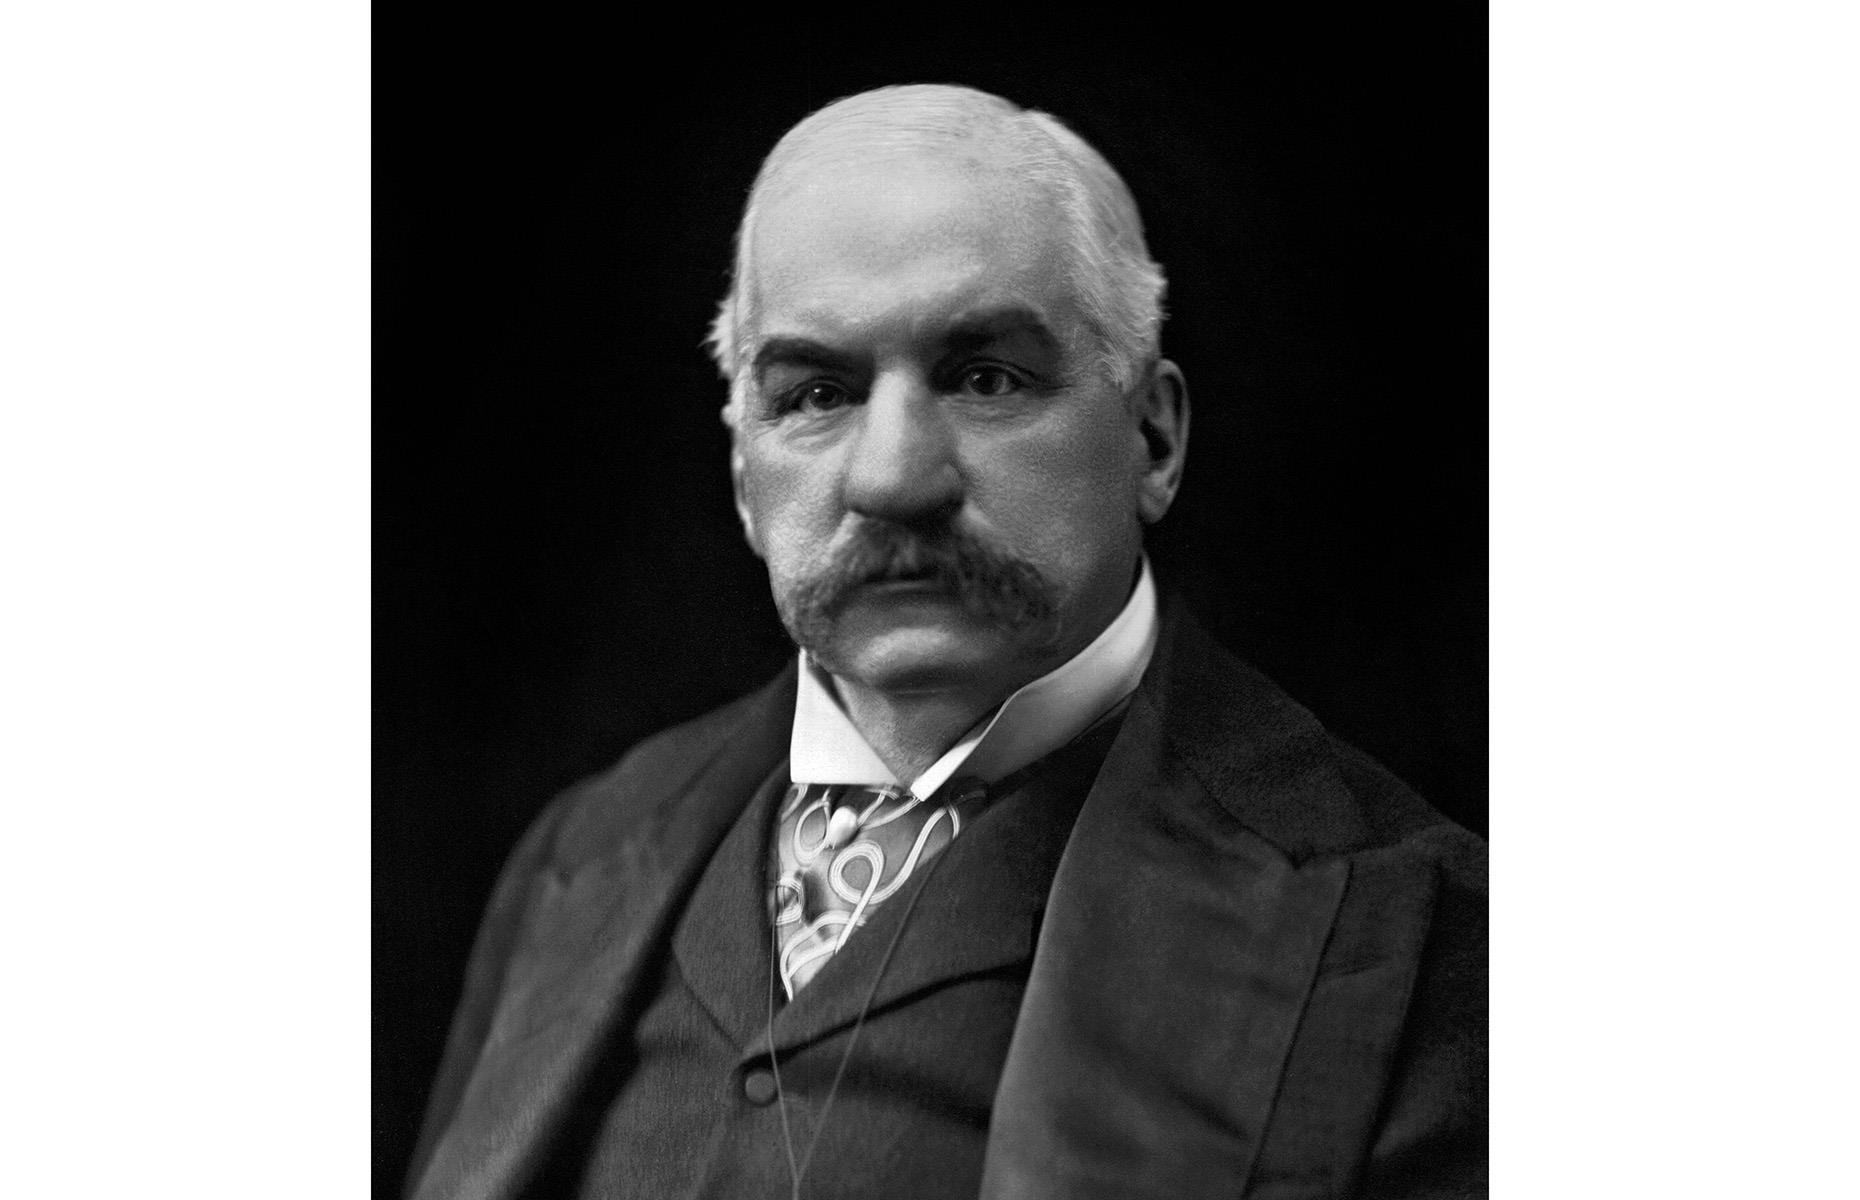 <p>Wall Street titan and investing tycoon J P Morgan dominated the corporate world of the Gilded Age. As the driving force behind a wave of industrial consolidation, Morgan was credited with shepherding the American financial world out of the "Panic of 1907", and was hailed for much of his career as the lynchpin of the American economy.</p>  <p>By the time of his death at the age of 75, Morgan had amassed an estimated fortune of $80 million – the equivalent of $2.5 billion (£1.9bn) in today’s money.</p>